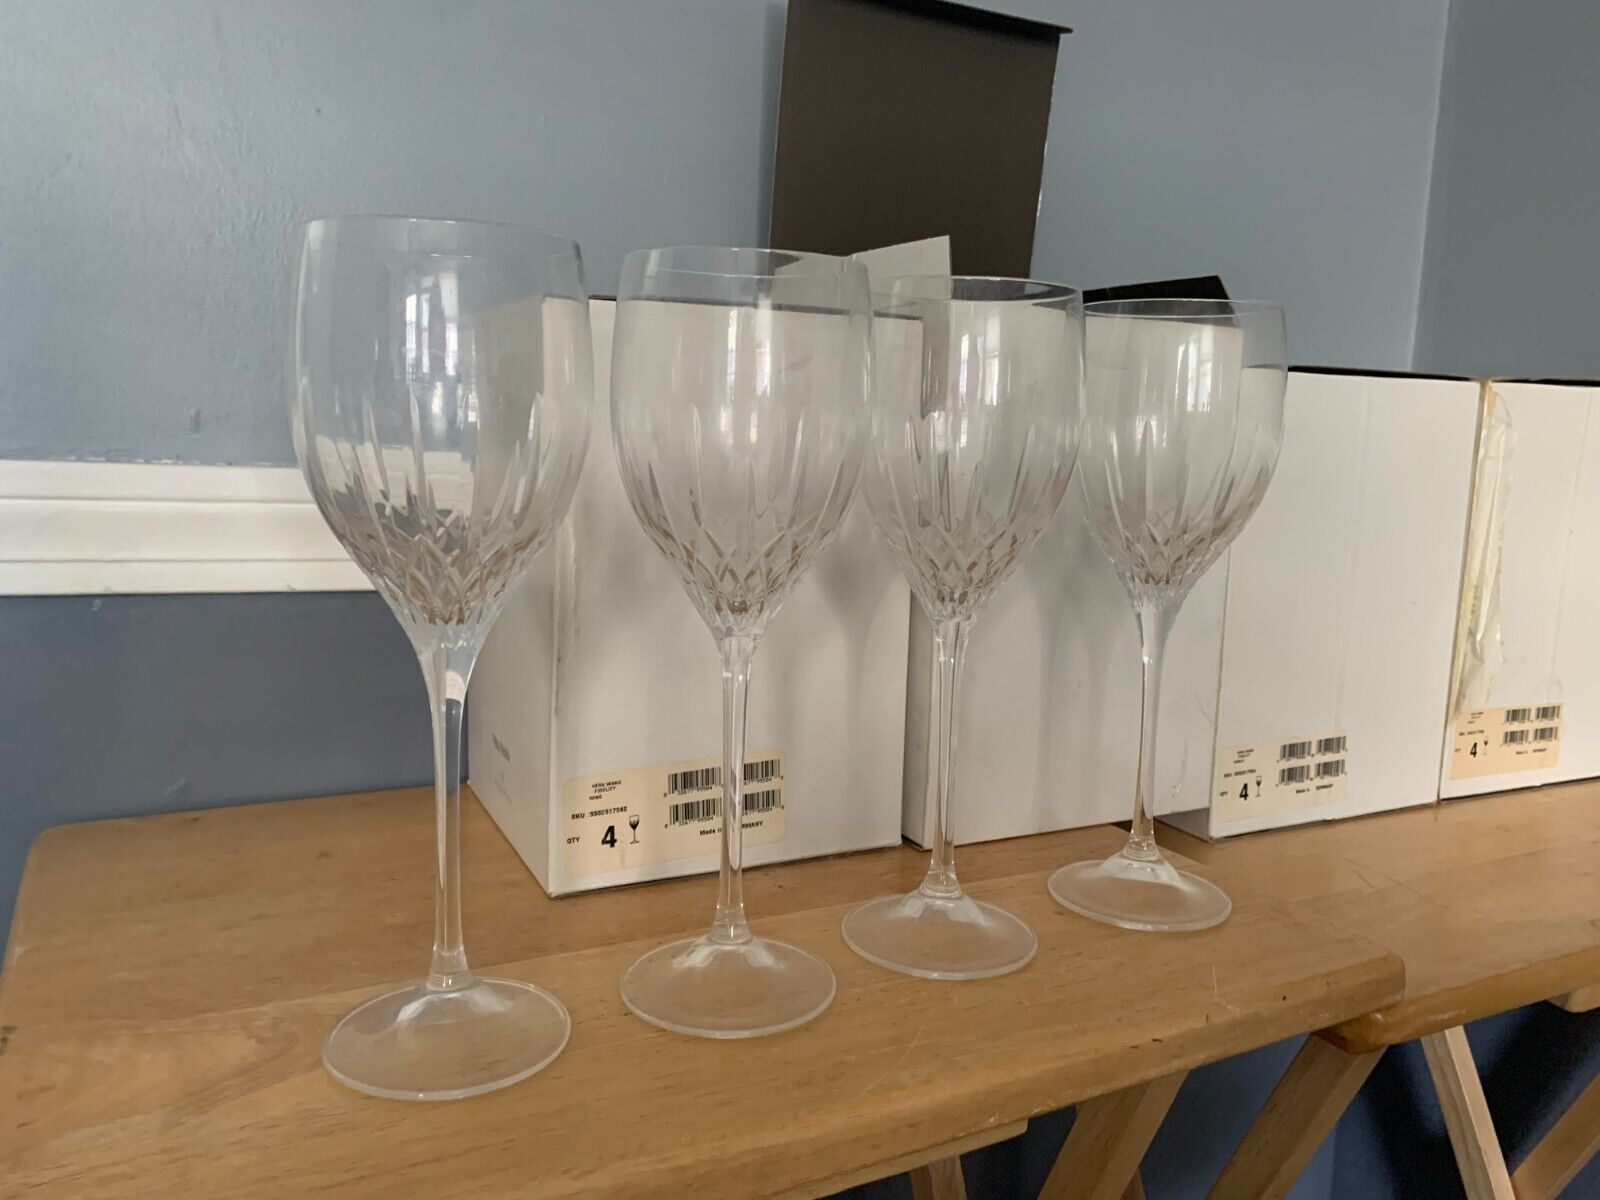 4 Wedgwood Vera Wang Crystal Fidelity Goblets (Still in original boxes)